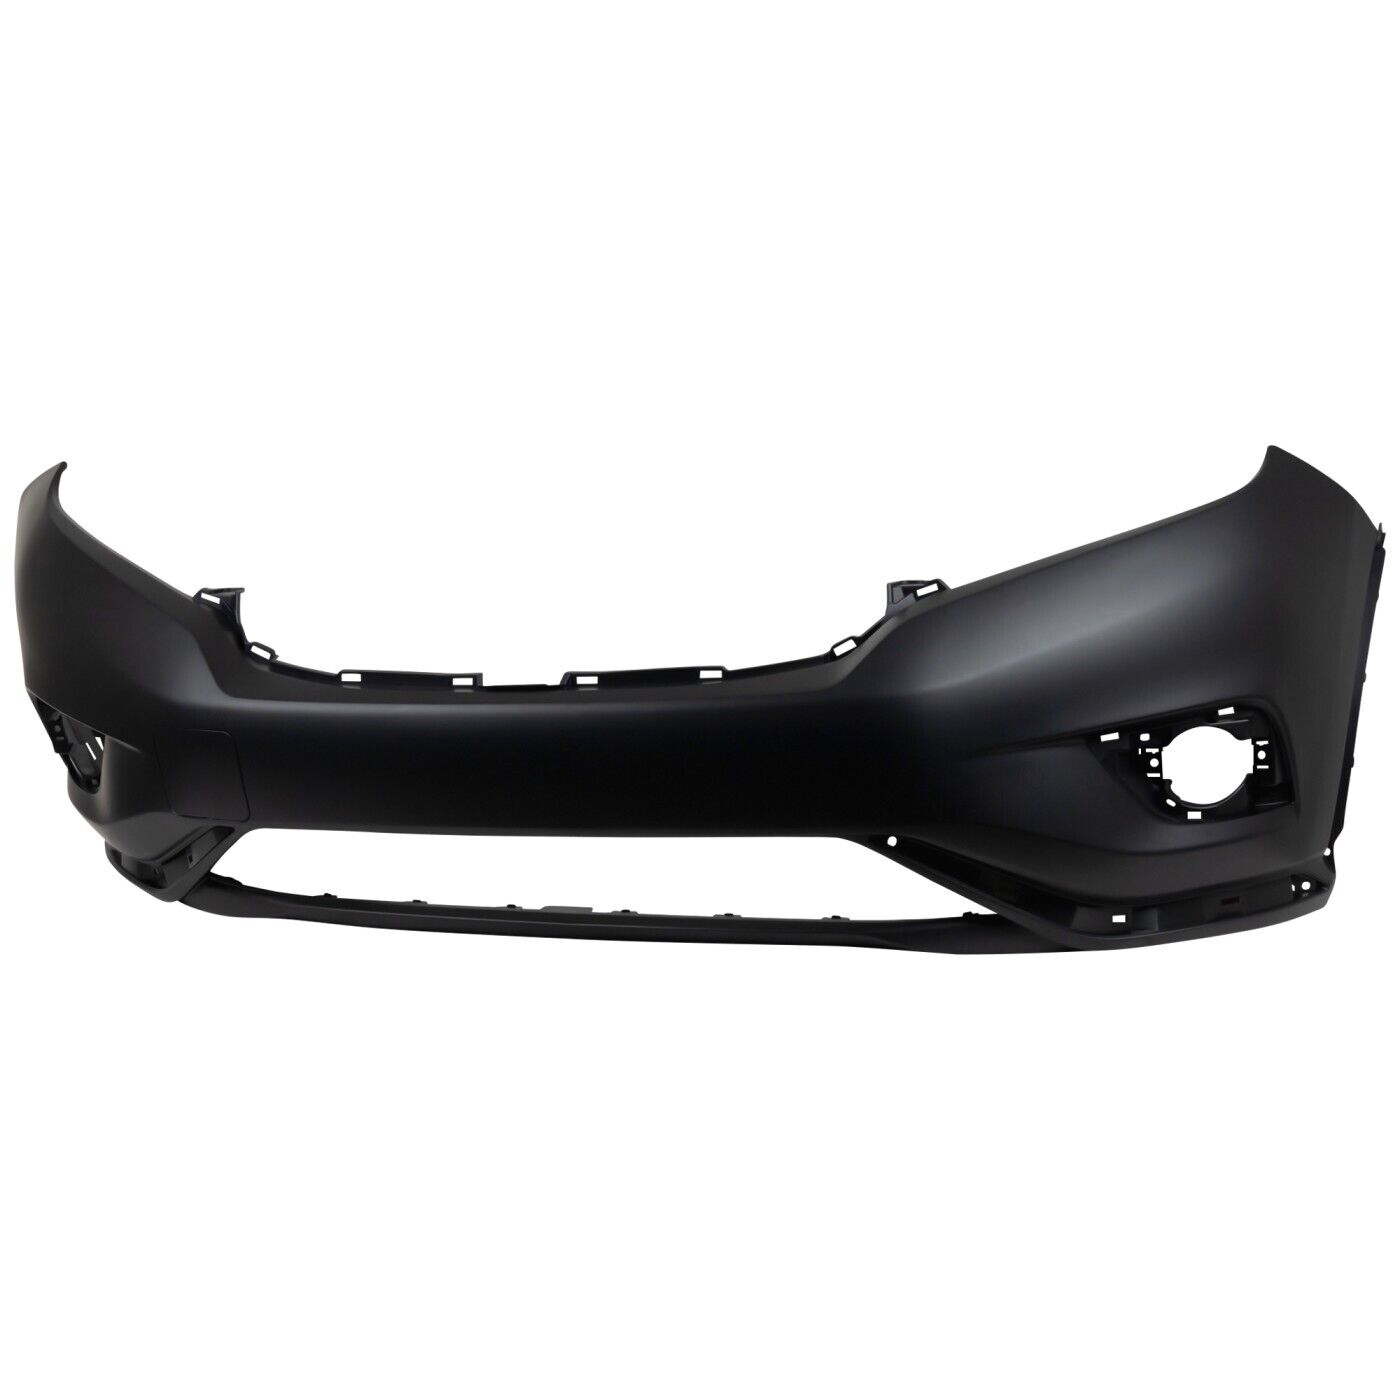 Front Bumper Cover For 2015 Nissan Murano Primed